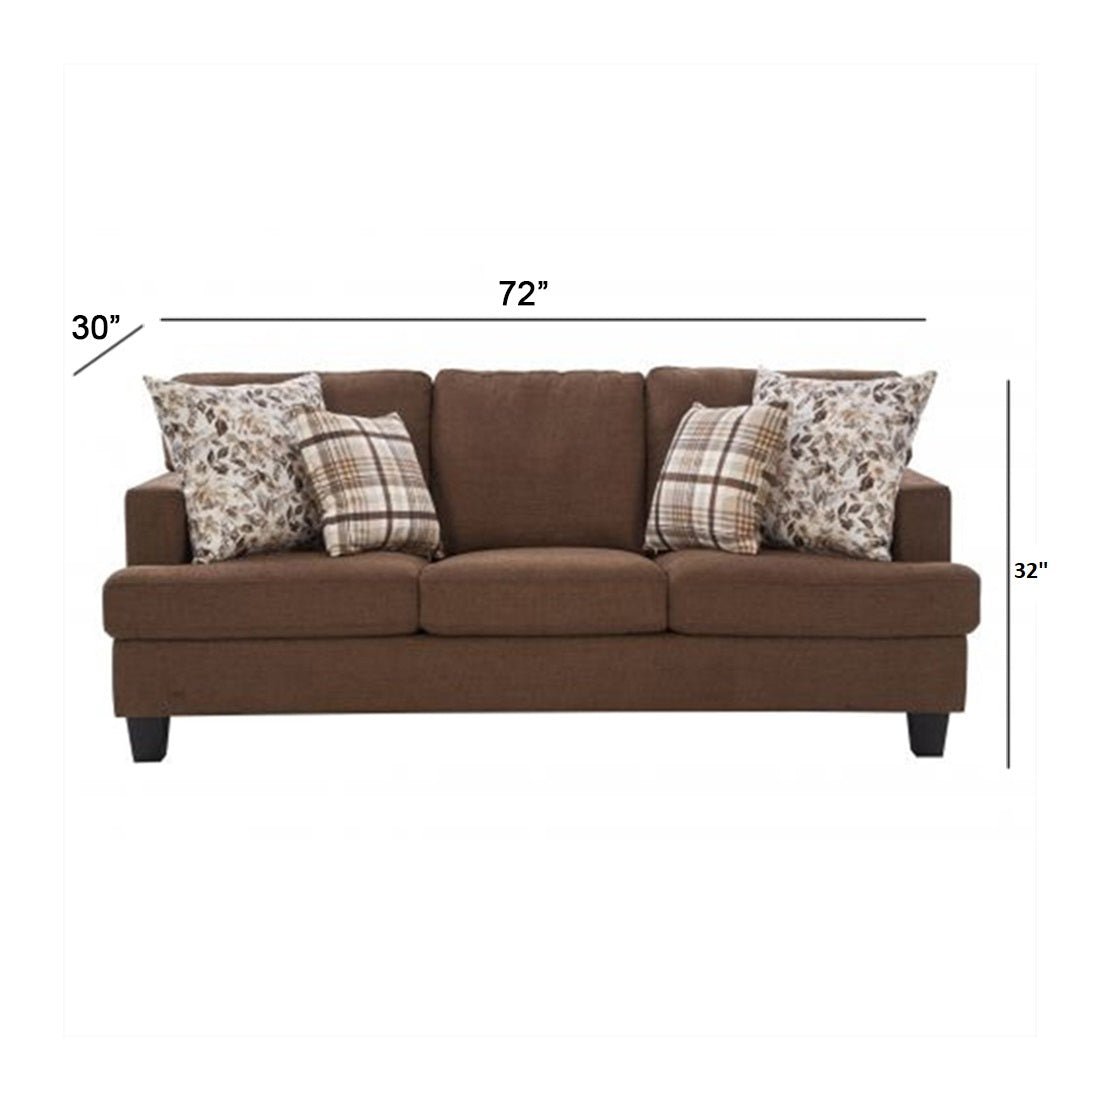 Apricot 3 Seater For Living Room - Brown | 3 Seater For Living Room - Torque India